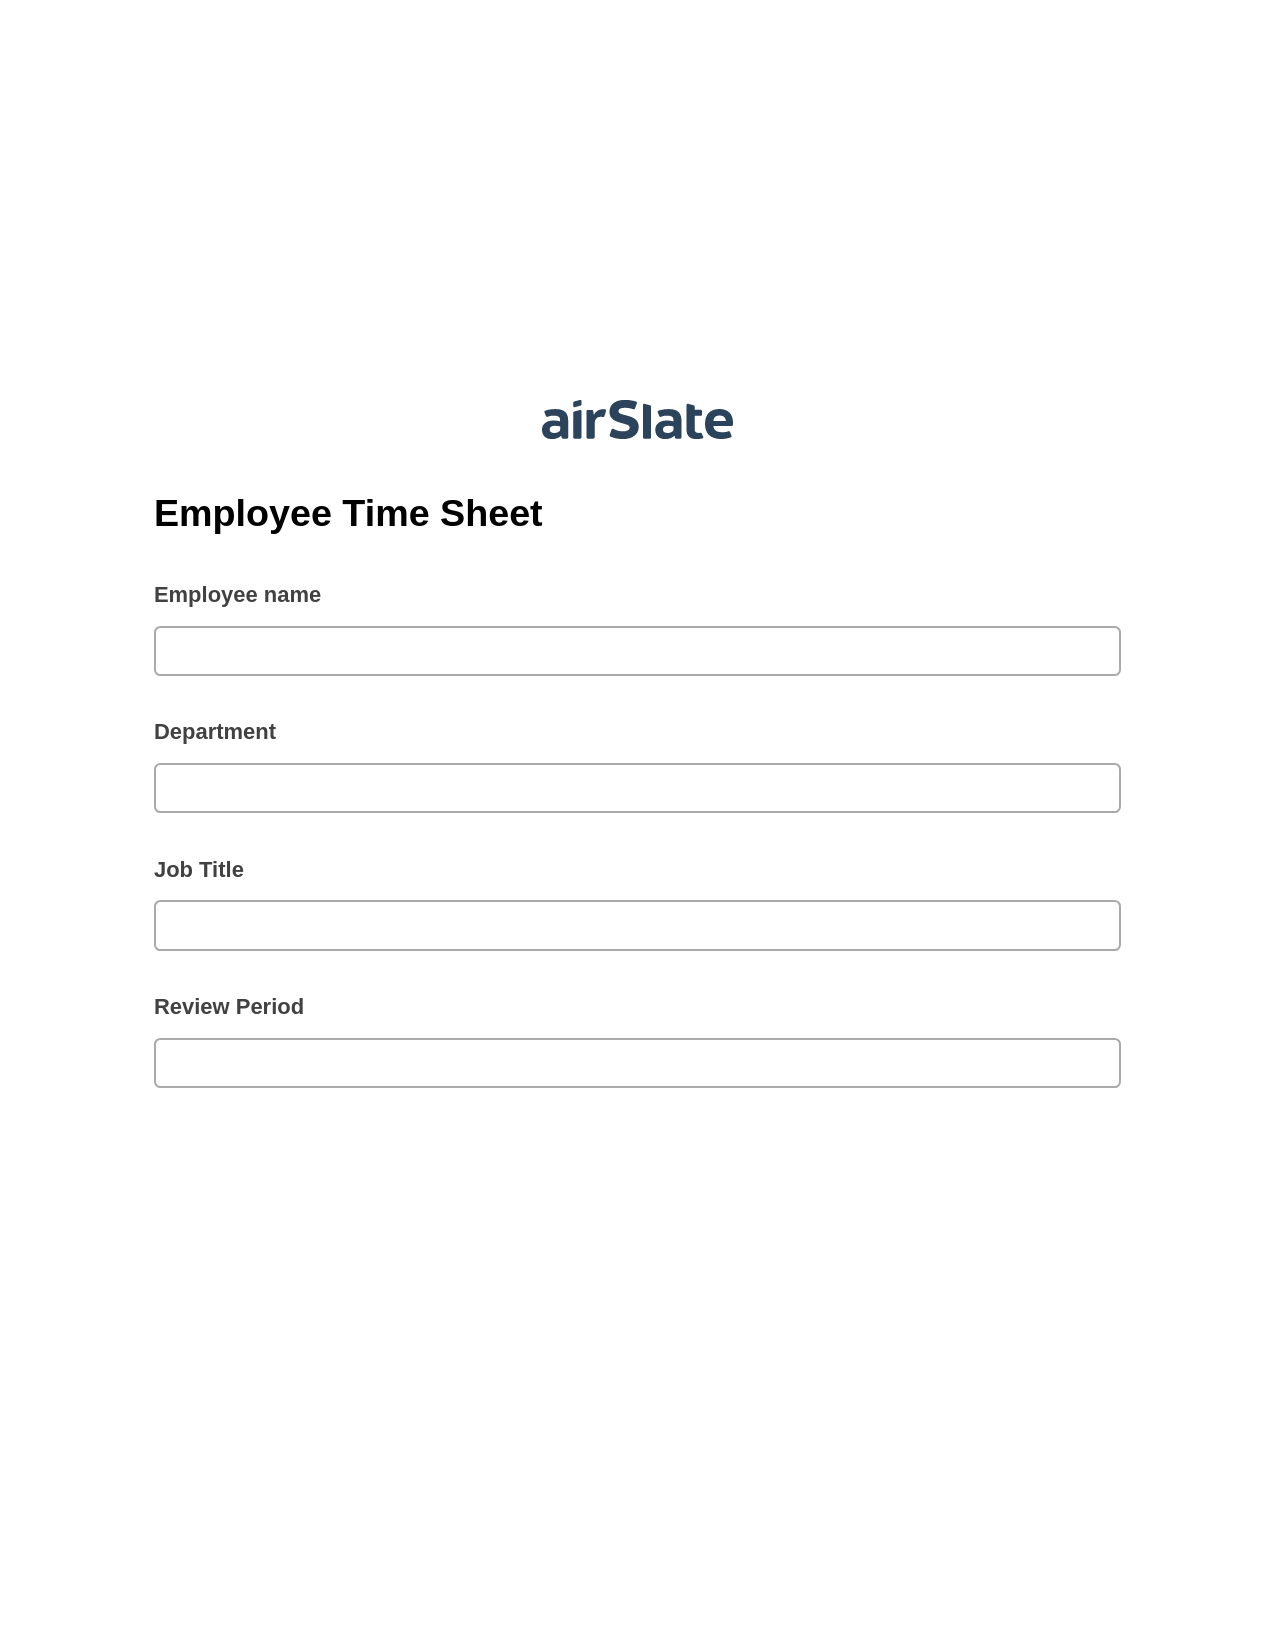 Employee Time Sheet Pre-fill Dropdowns from Excel Bot, Update Audit Trail Bot, Export to WebMerge Bot